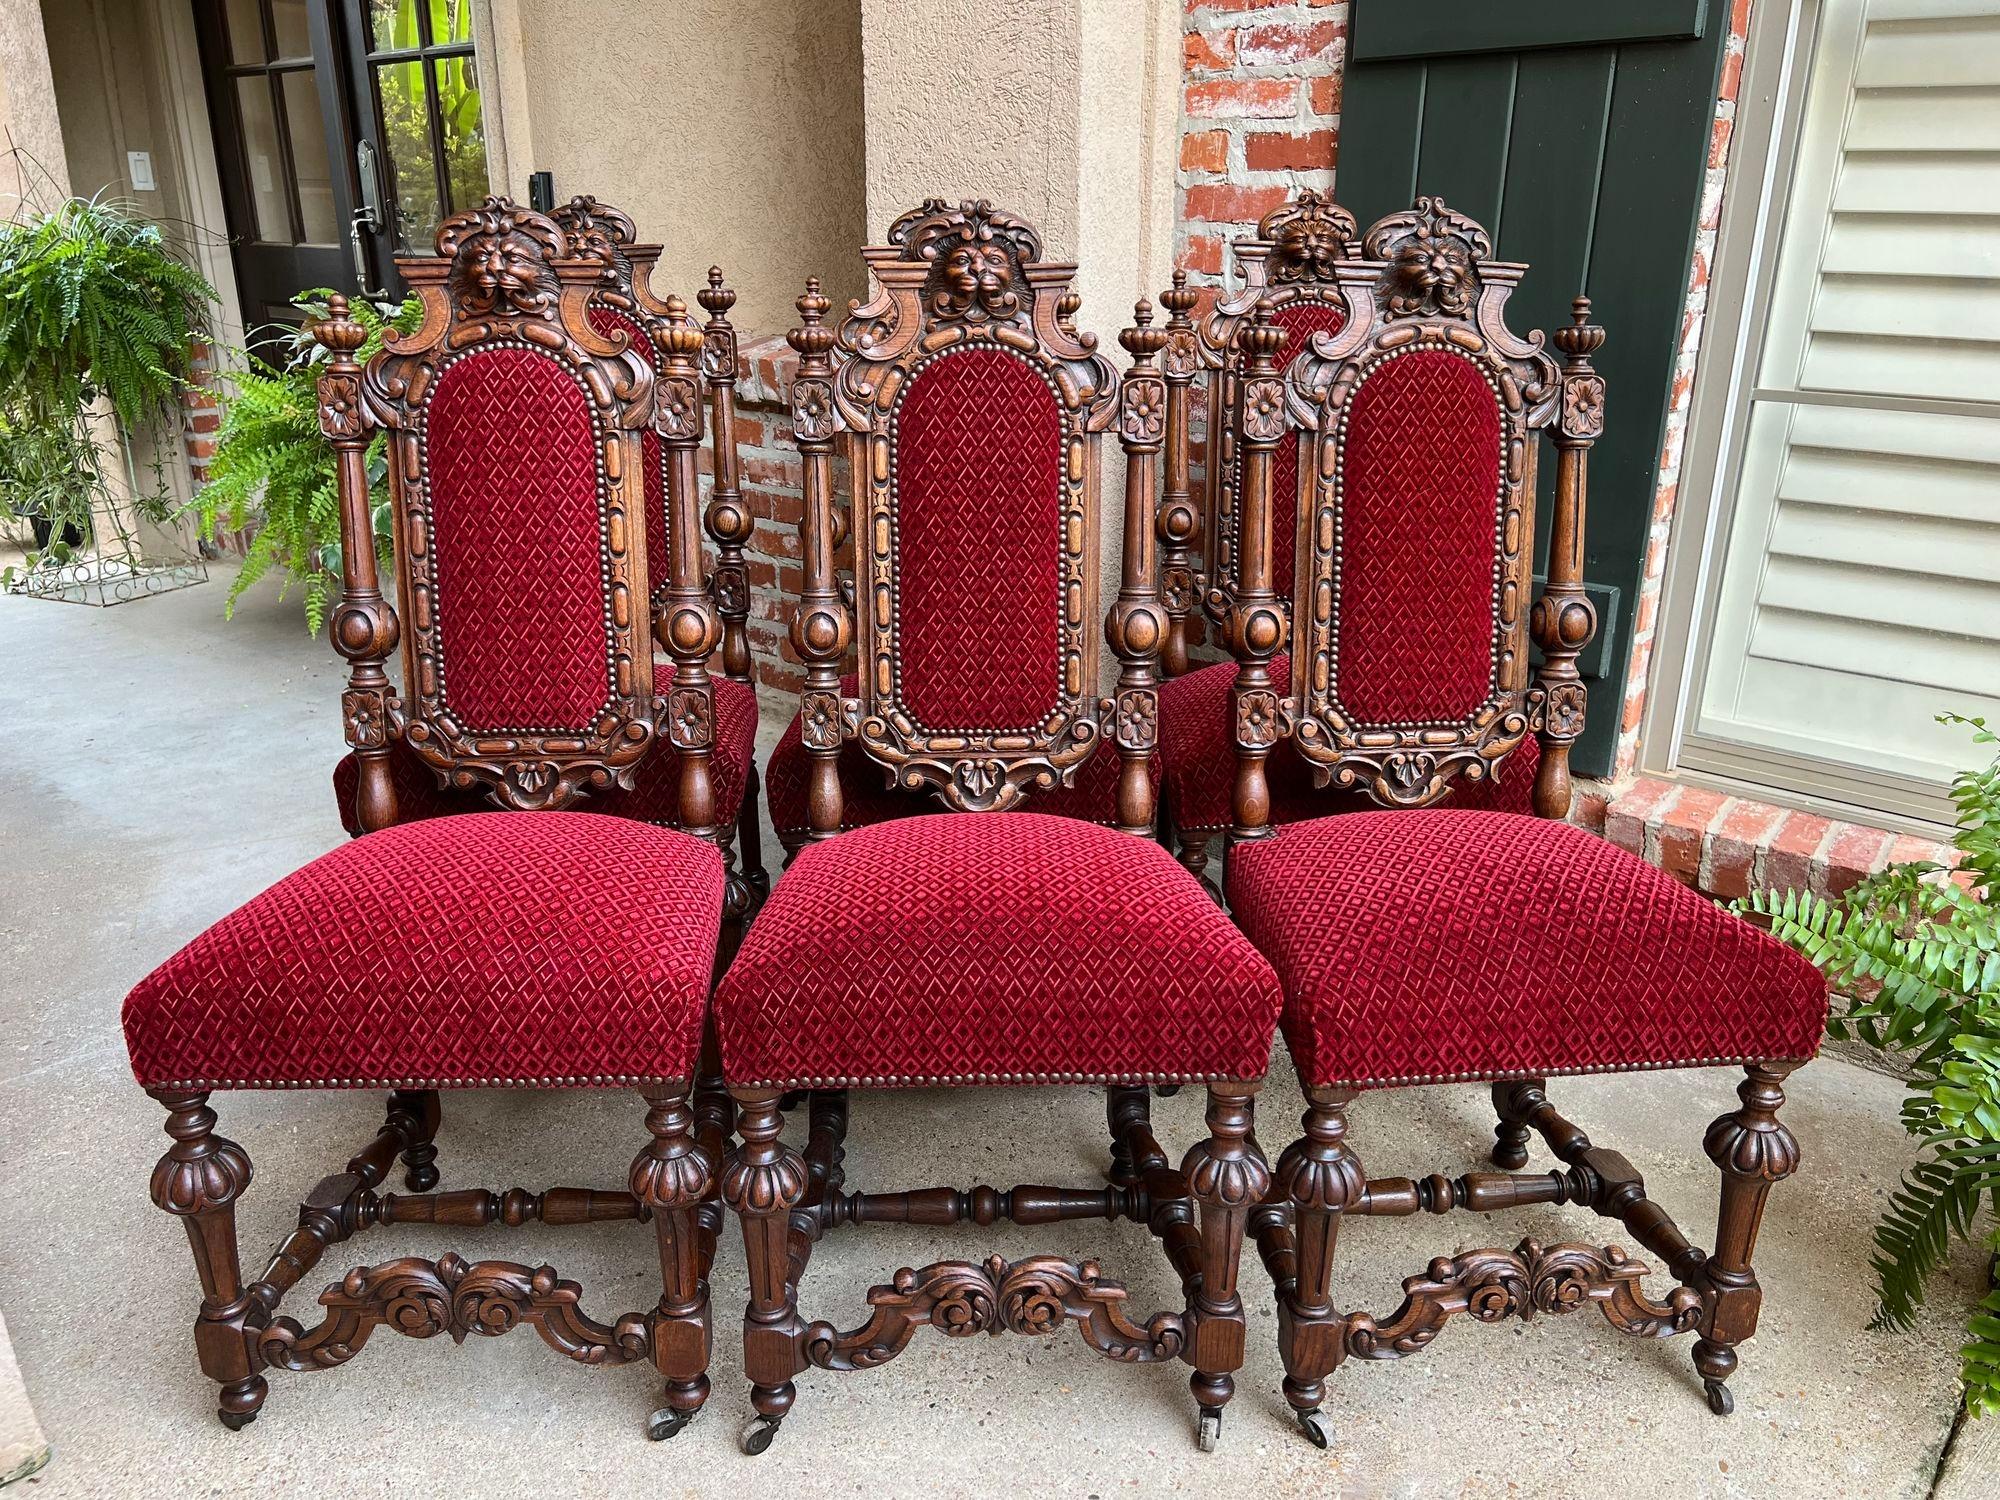 Set 6 Antique French Dining Chairs Renaissance Carved Oak Lion Baroque Louis XIV.

Direct from France, a gorgeous set of 6 antique chairs, heavily carved in Renaissance/Baroque style.  Stunning for a formal dining or French kitchen and with their